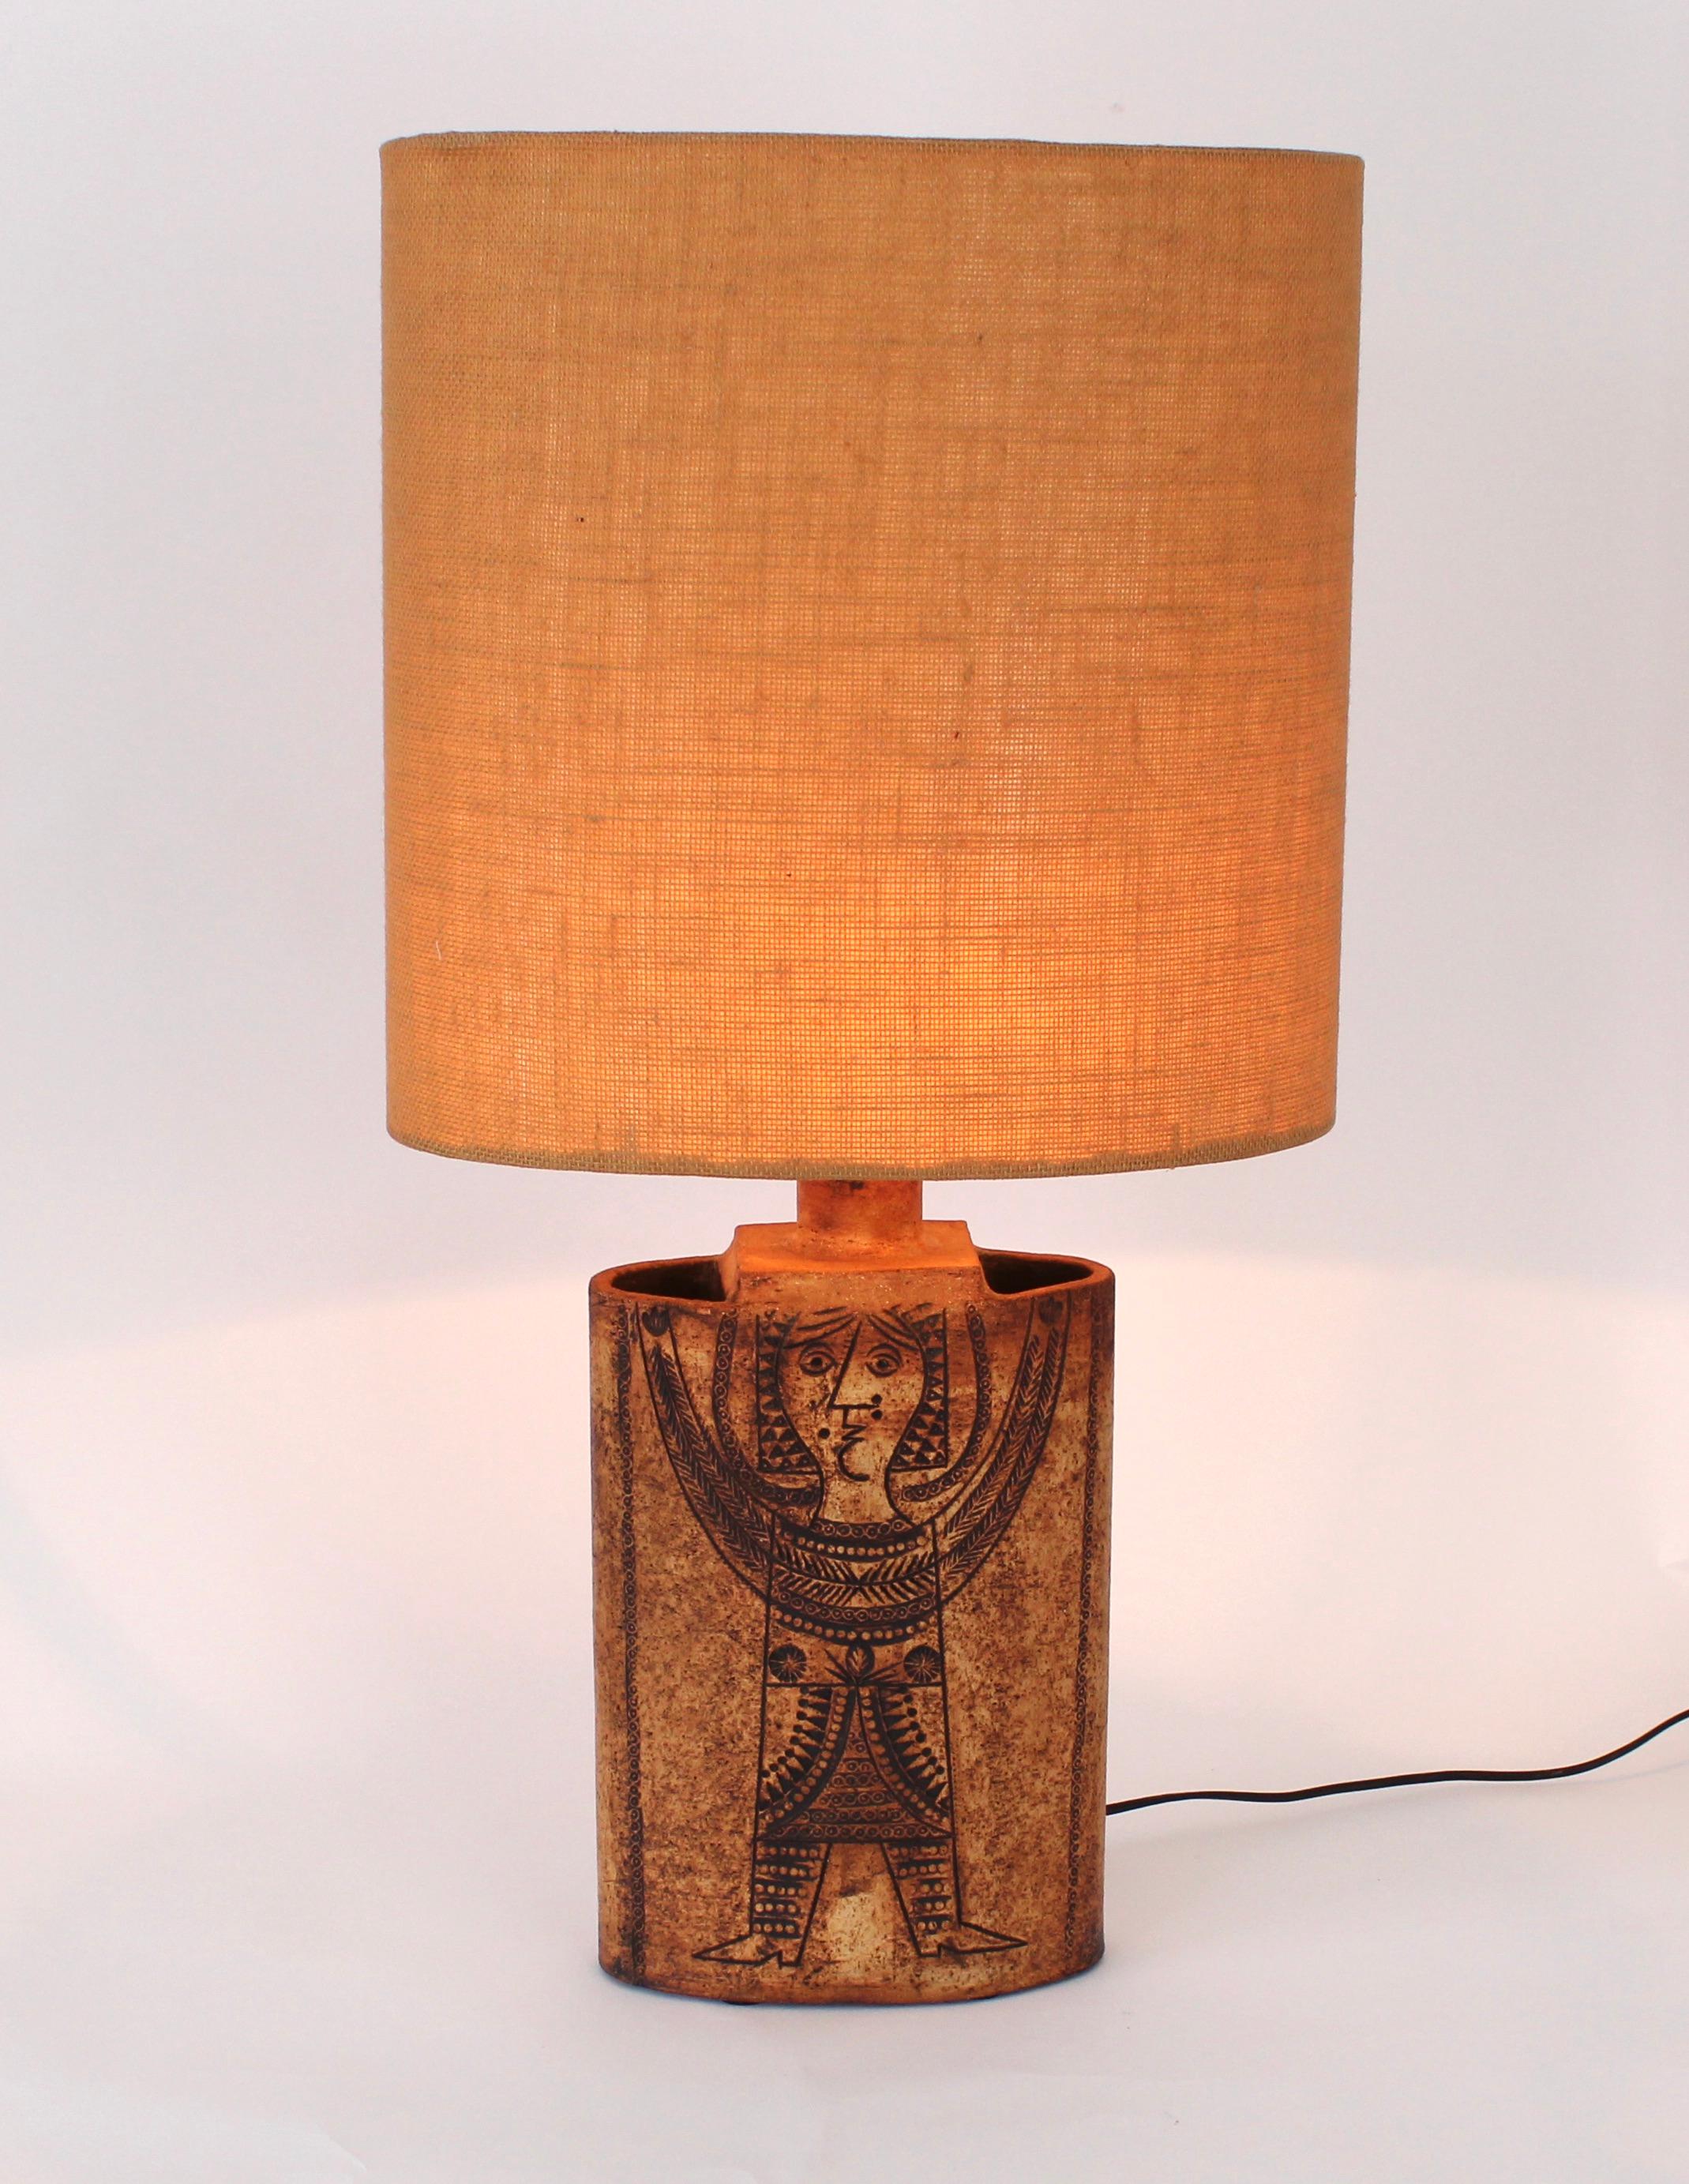 Roger Capron French figural ceramic table lamp. Original oval burlap shade. 
The clay gres is rubbed with iron oxides which penetrate into the incised drawing. 
The lamp is unglazed thus in the firing the iron oxides in the incised drawing burn to